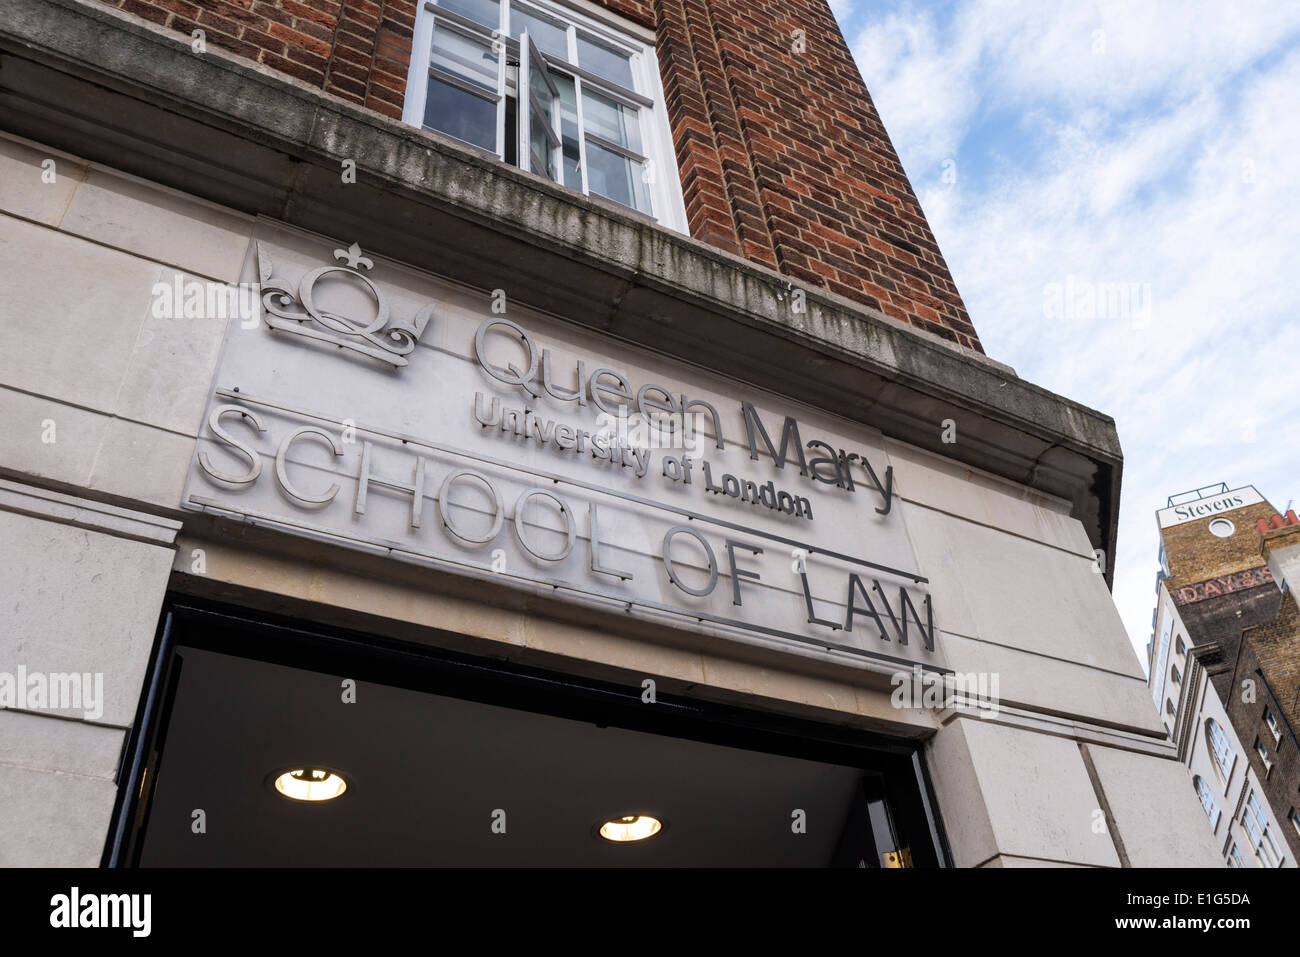 Queen Mary University of London, School of Law building in London, UK Stock Photo